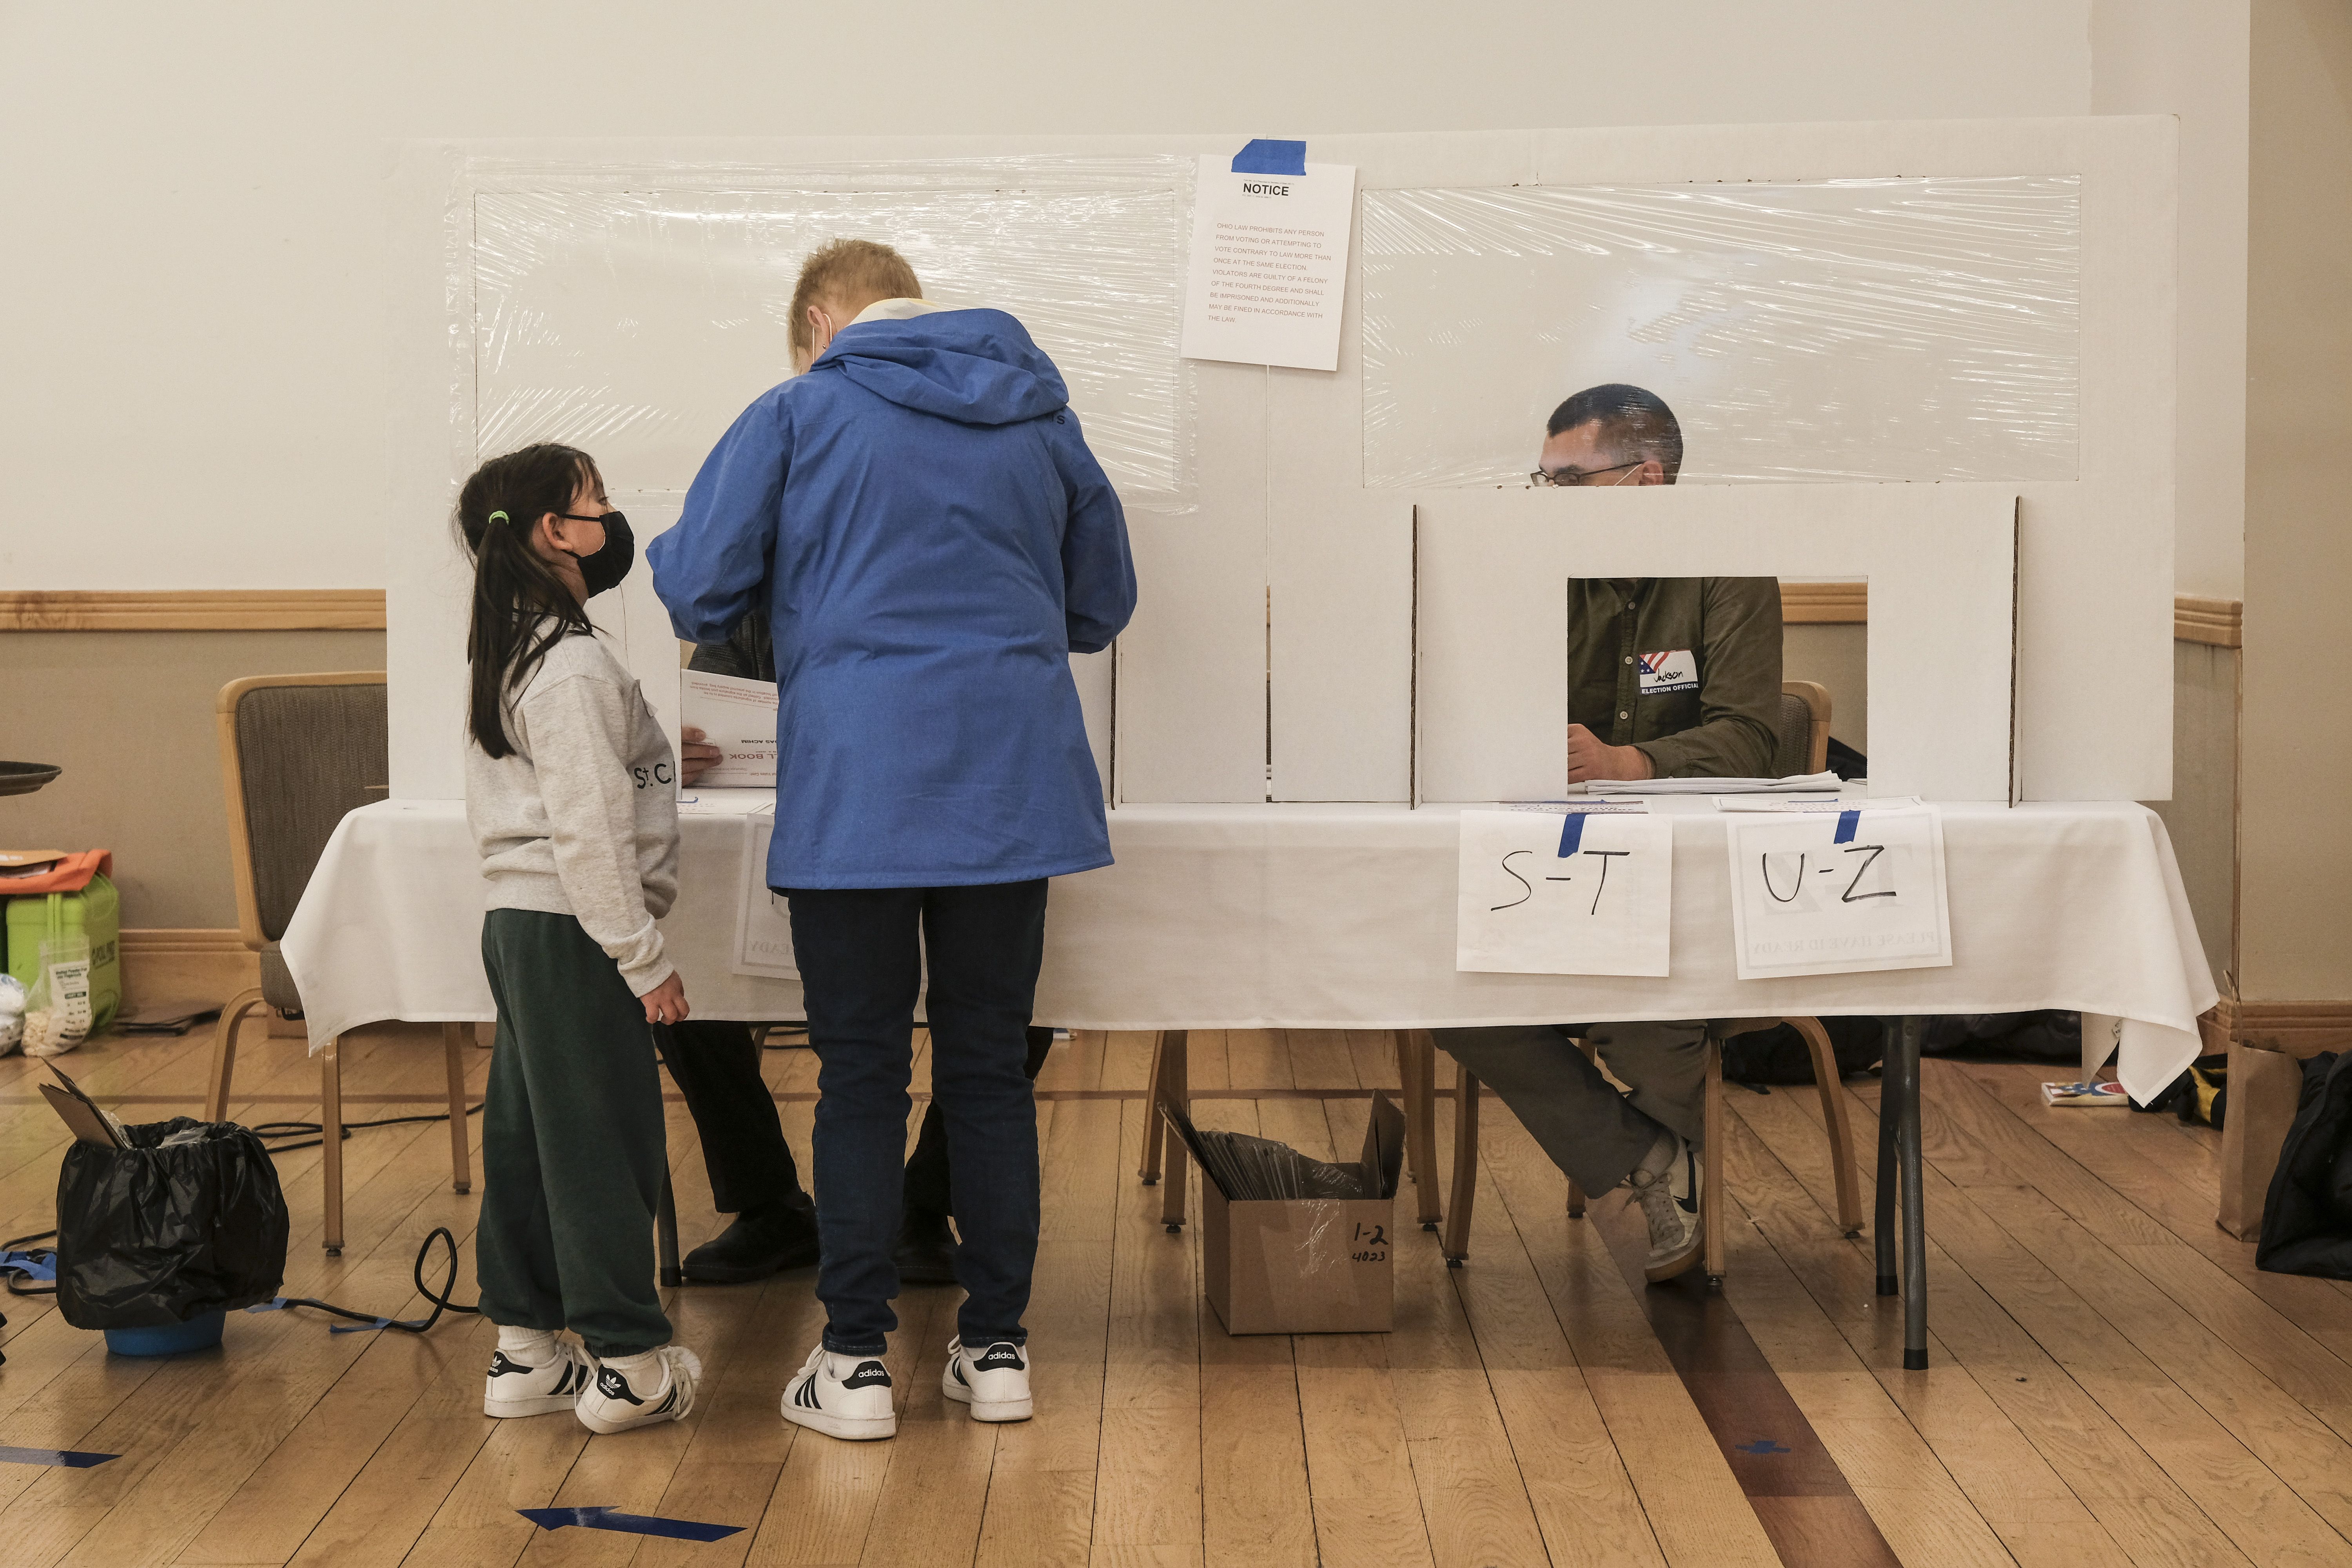 Voters cast their ballots on Election Day at a polling station at the Congregation Aguda Achim in Bexley on November 3, 2020 in Columbus, Ohio.